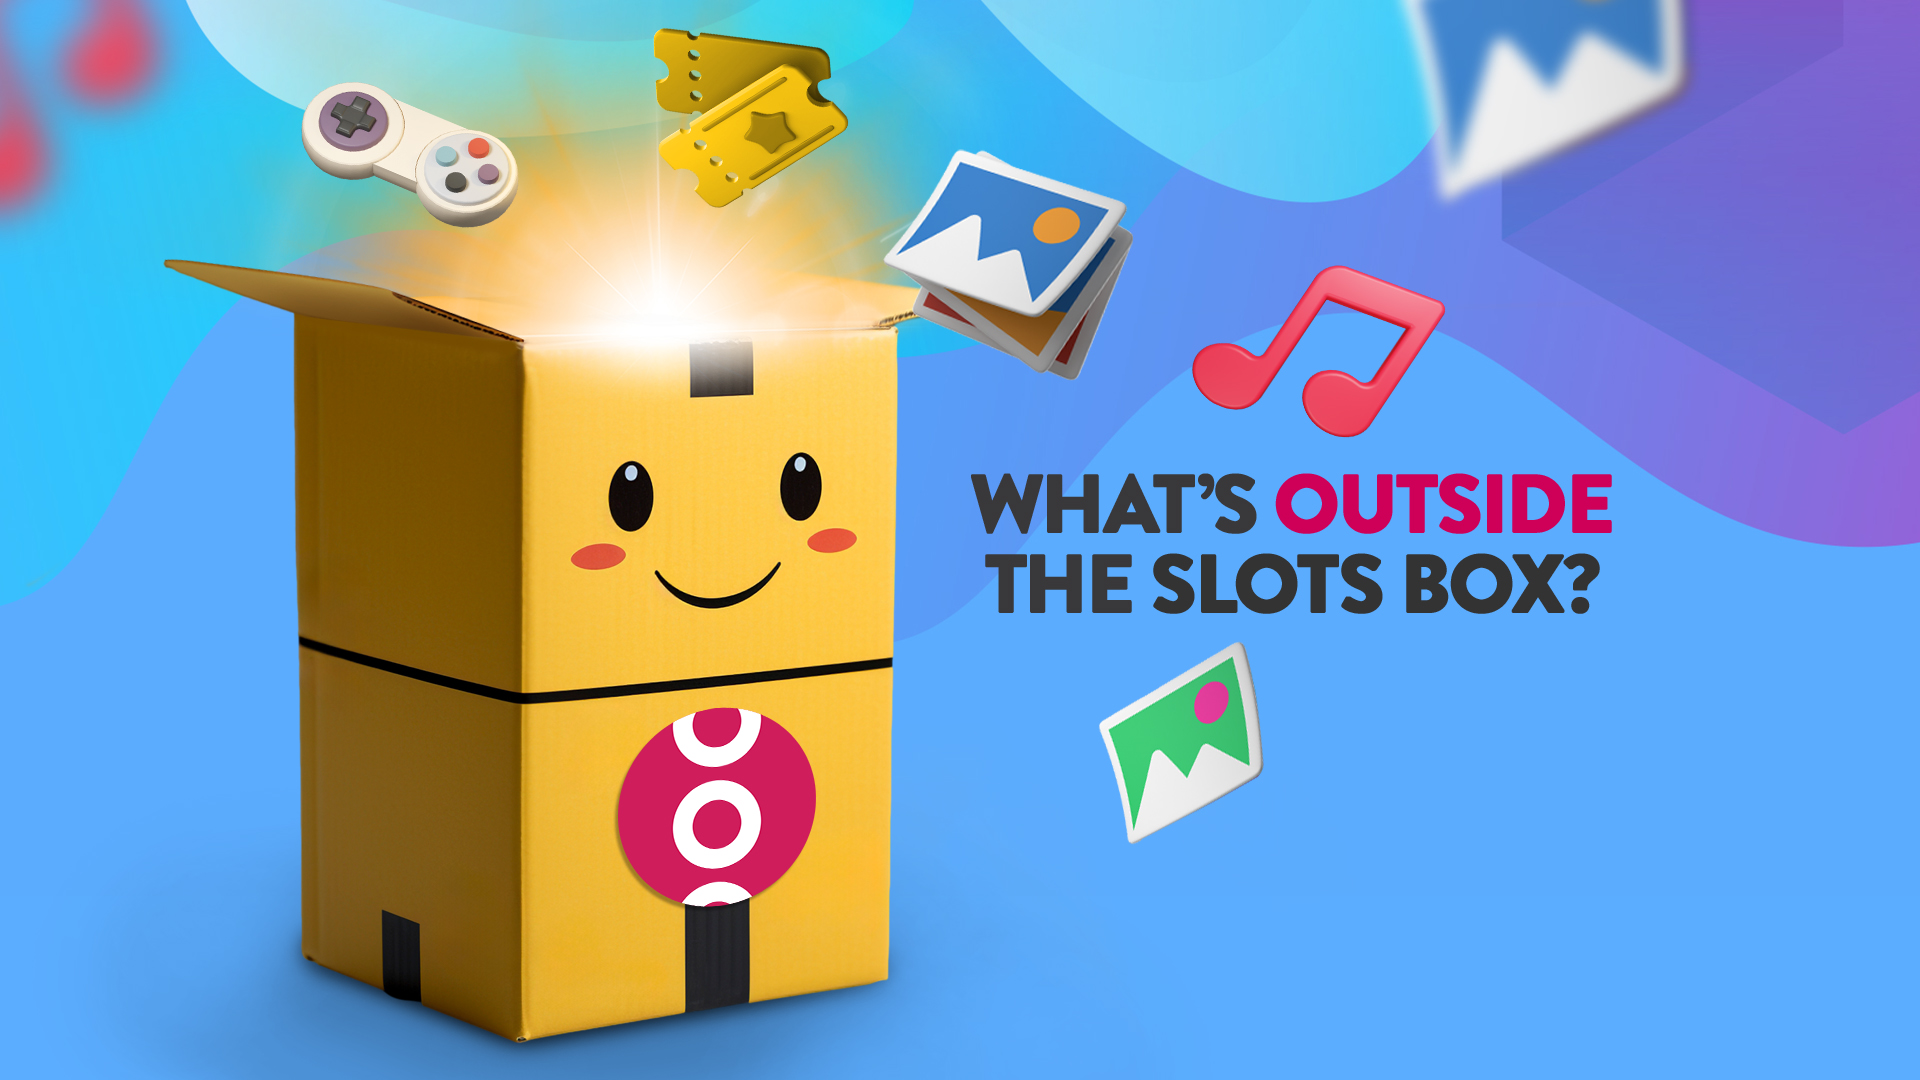 There are two stacked boxes with a smiley face on it and various fun activities coming out of the top. To the right is text that says ‘What’s Outside the Slots Box?’, and it’s all on a blue-purple background.